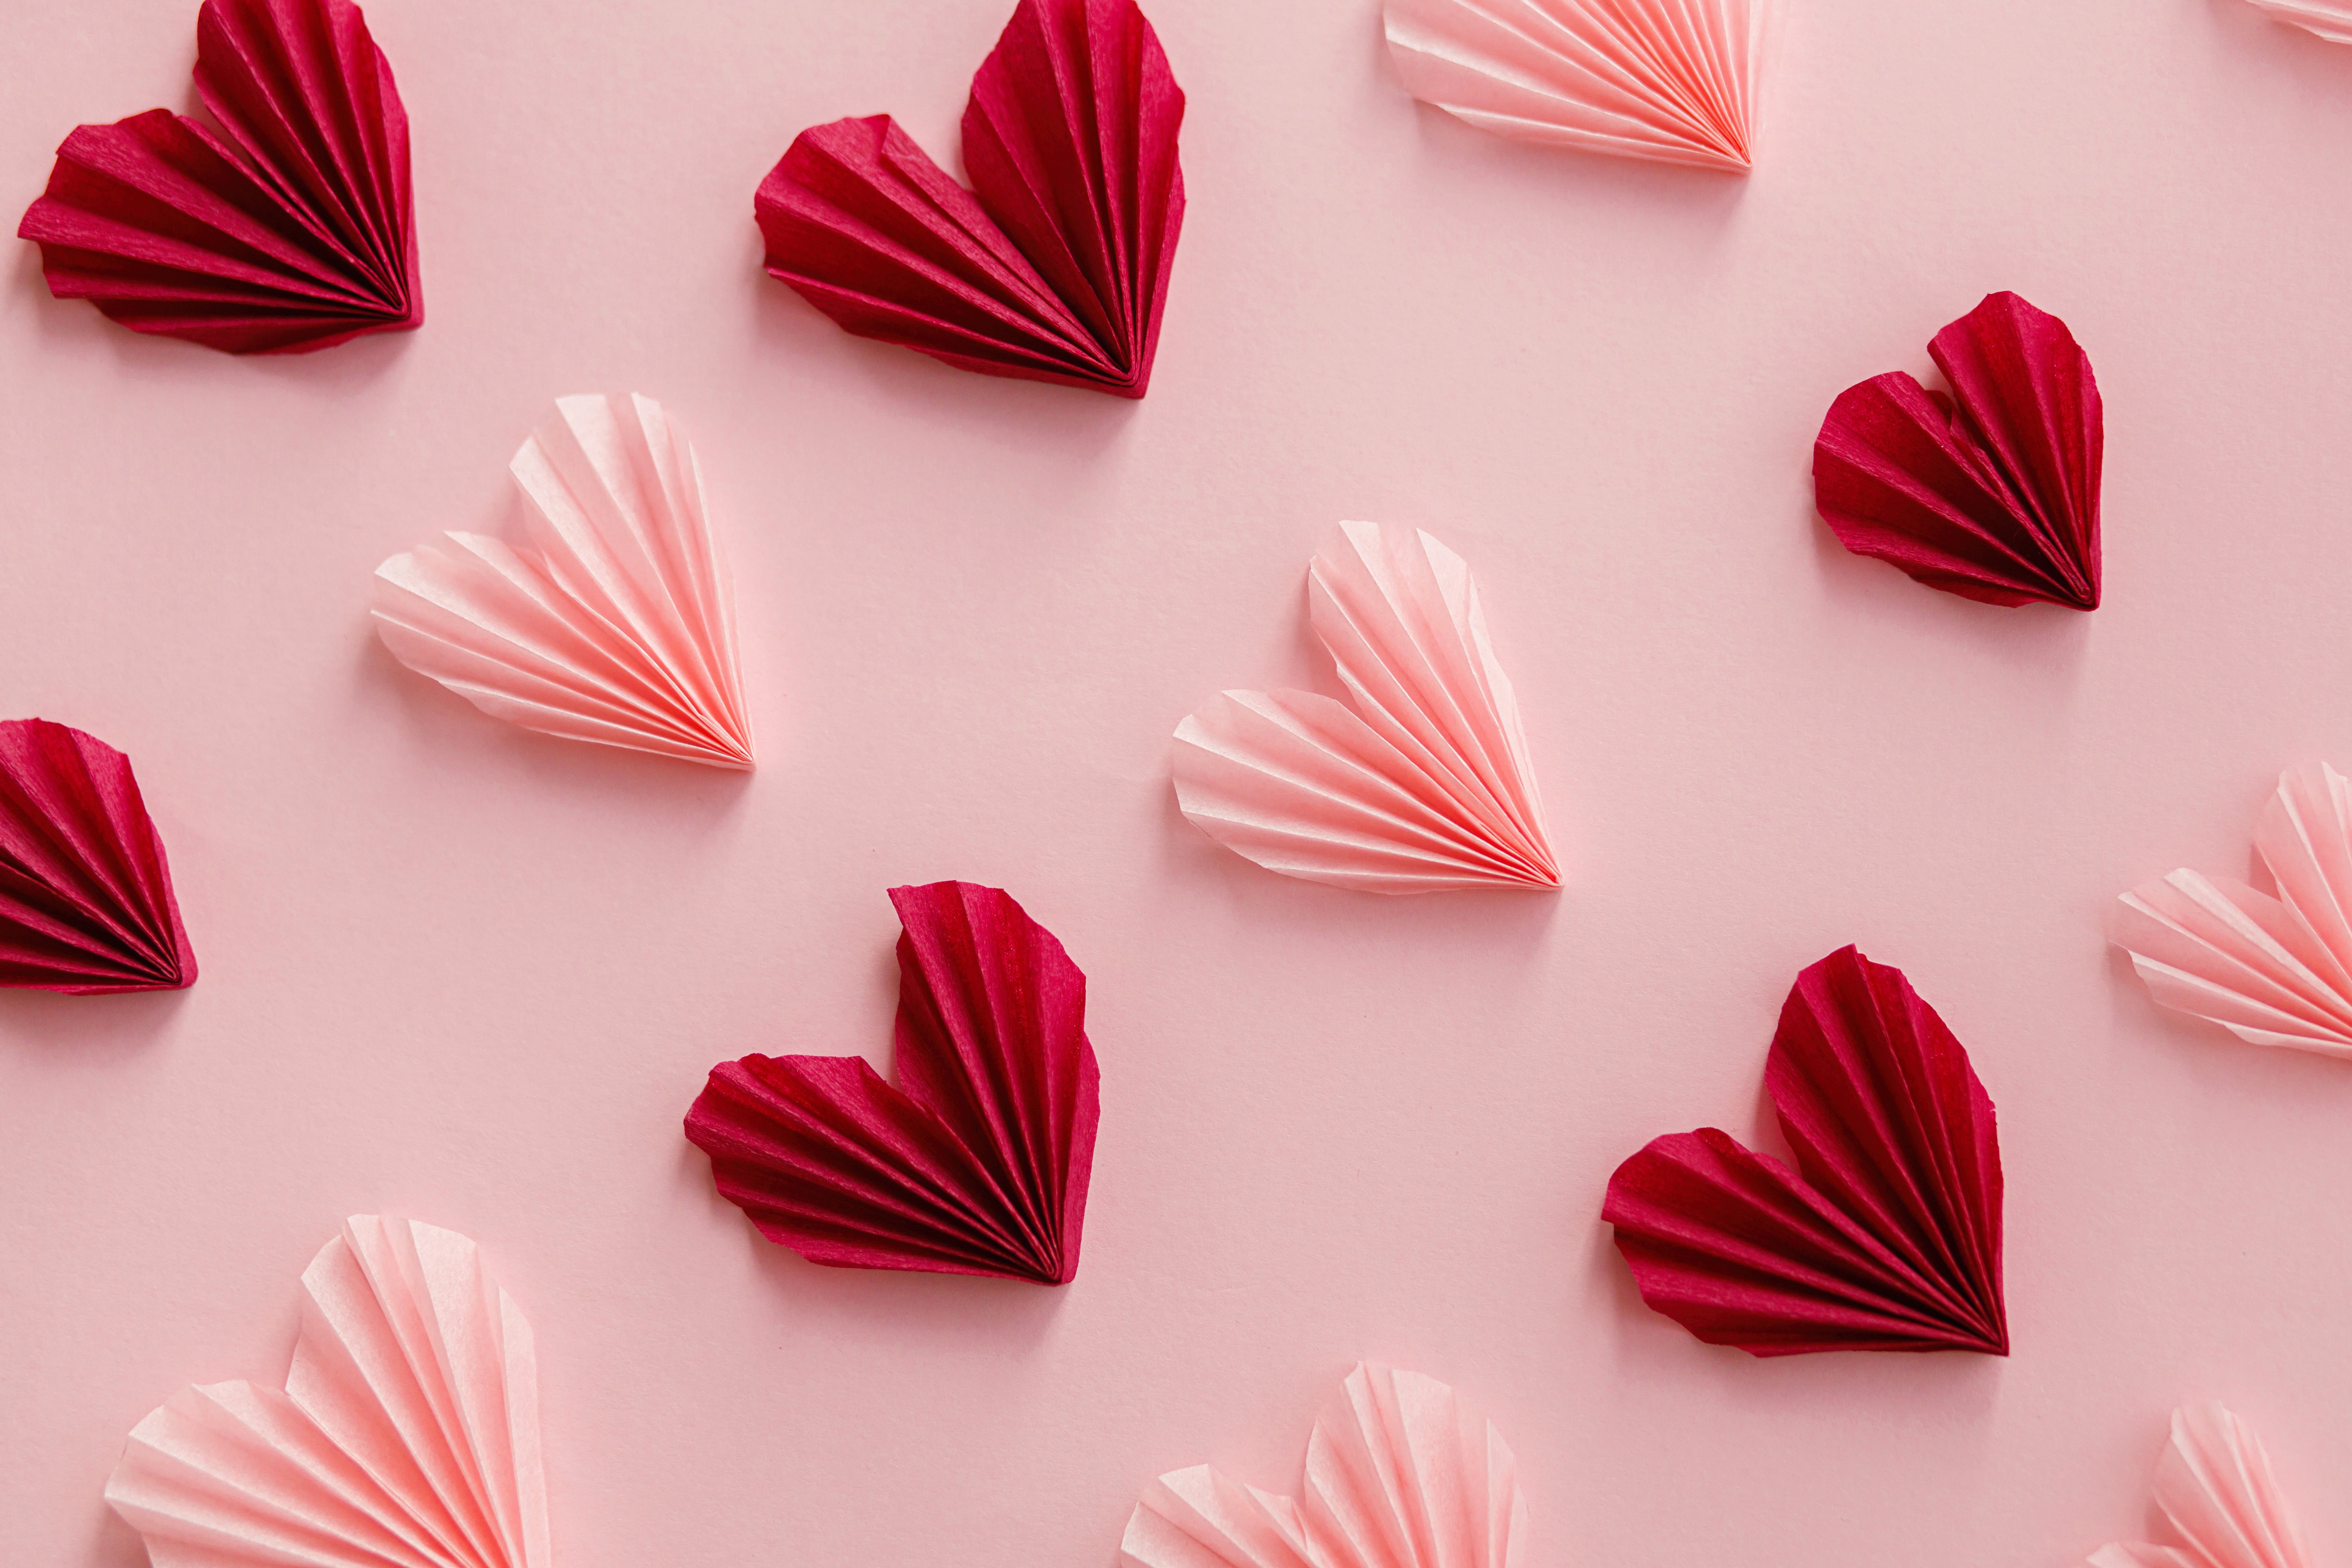 Featured image: Origami hearts in pink and red - Lost the spark with your MSP? 8 things to look for in an IT partner.